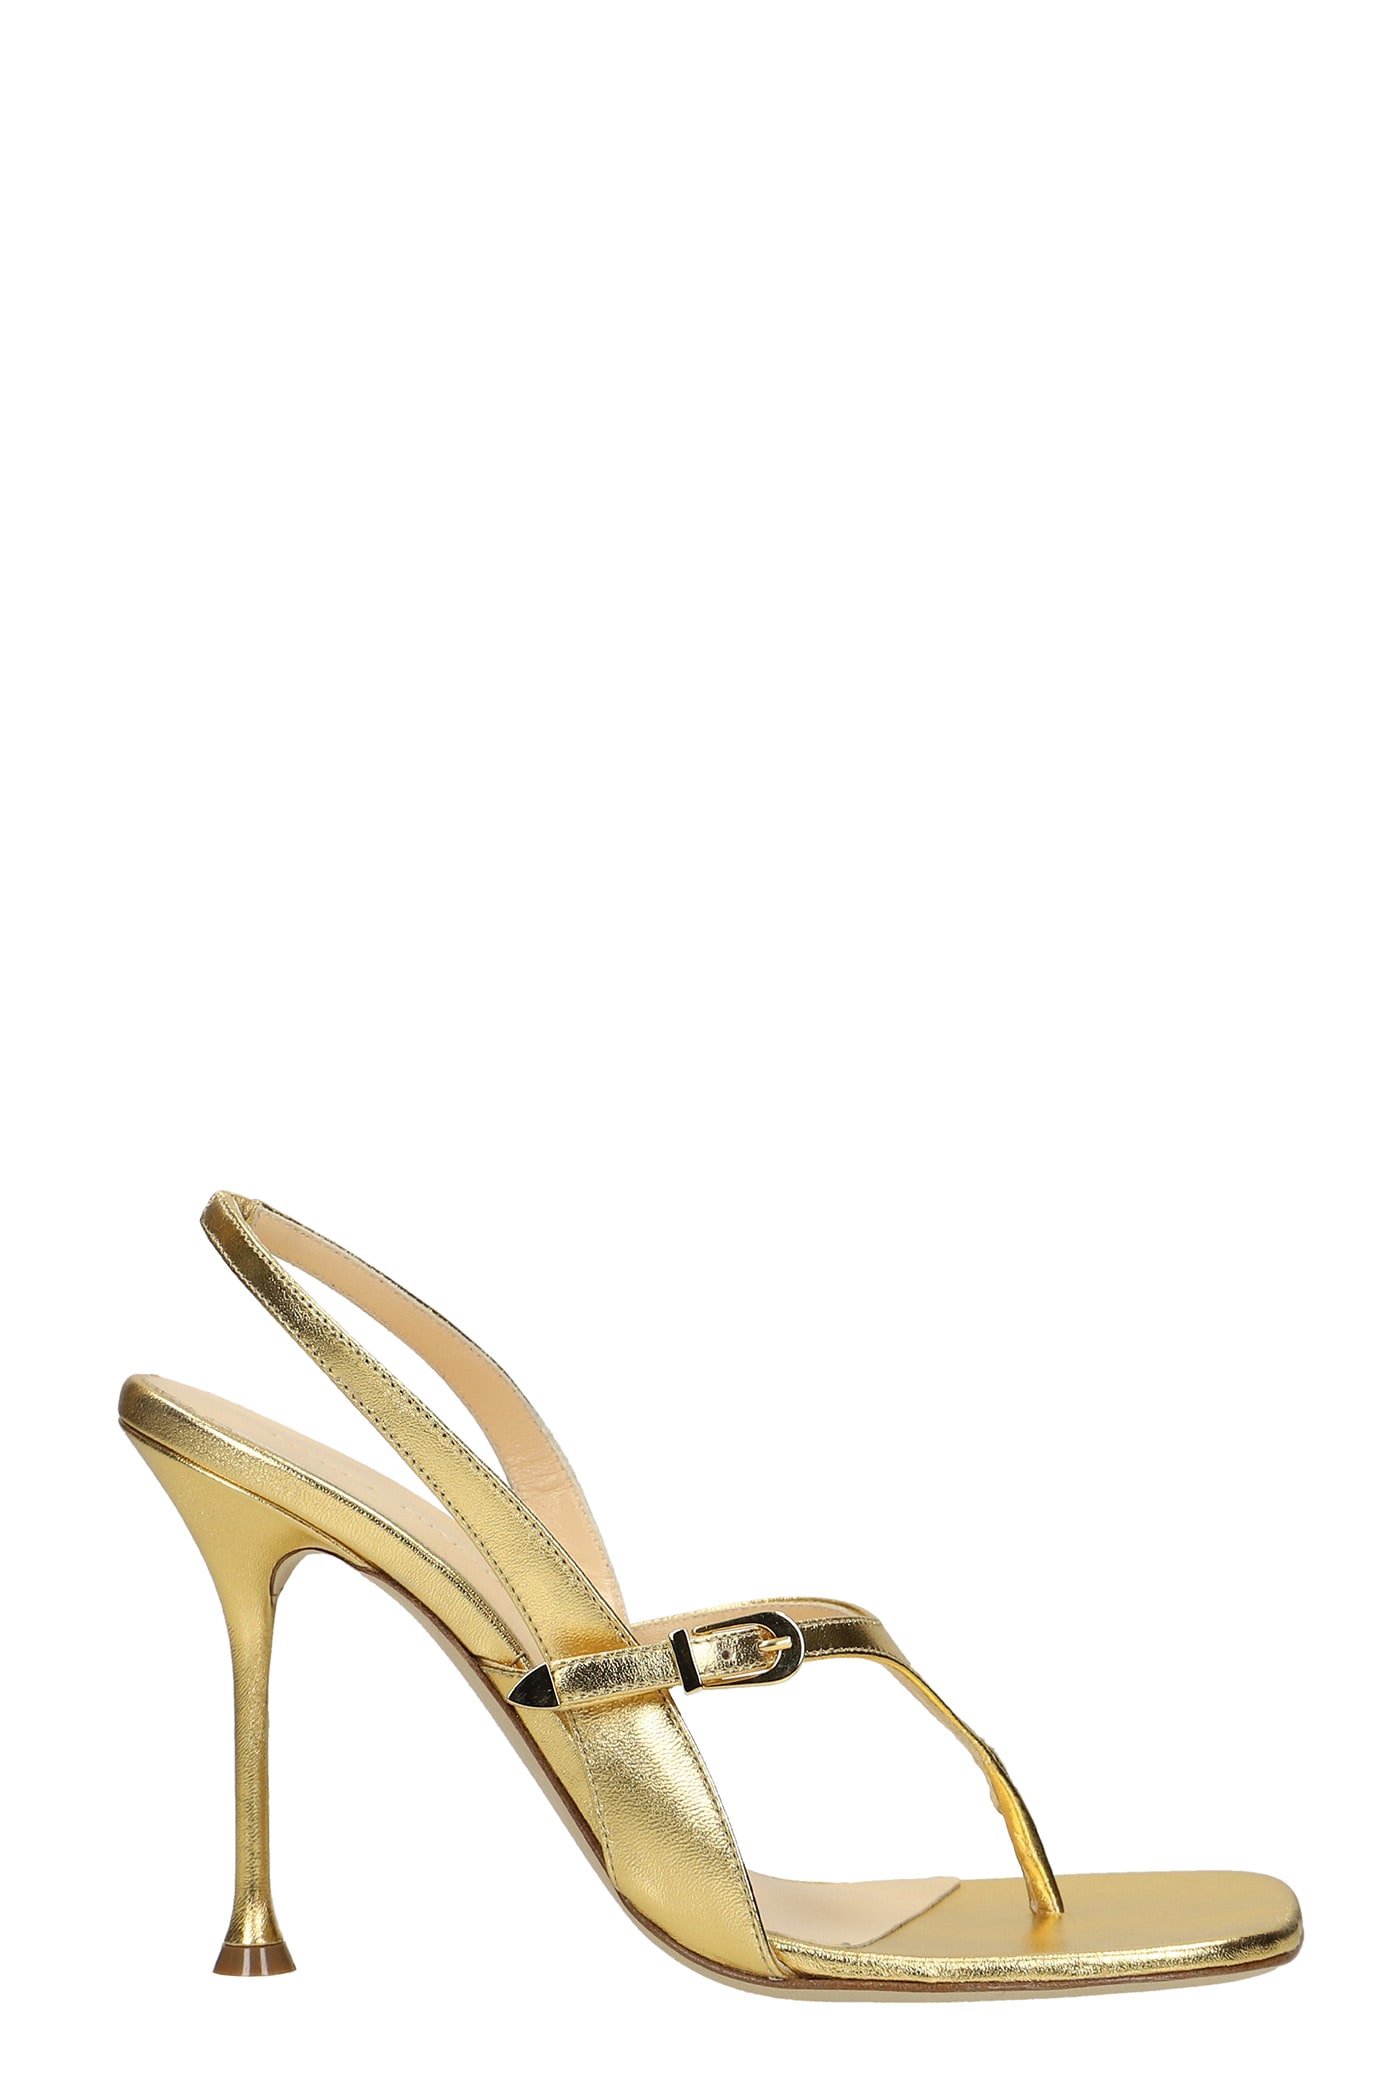 Magda Butrym Sandals In Gold Leather